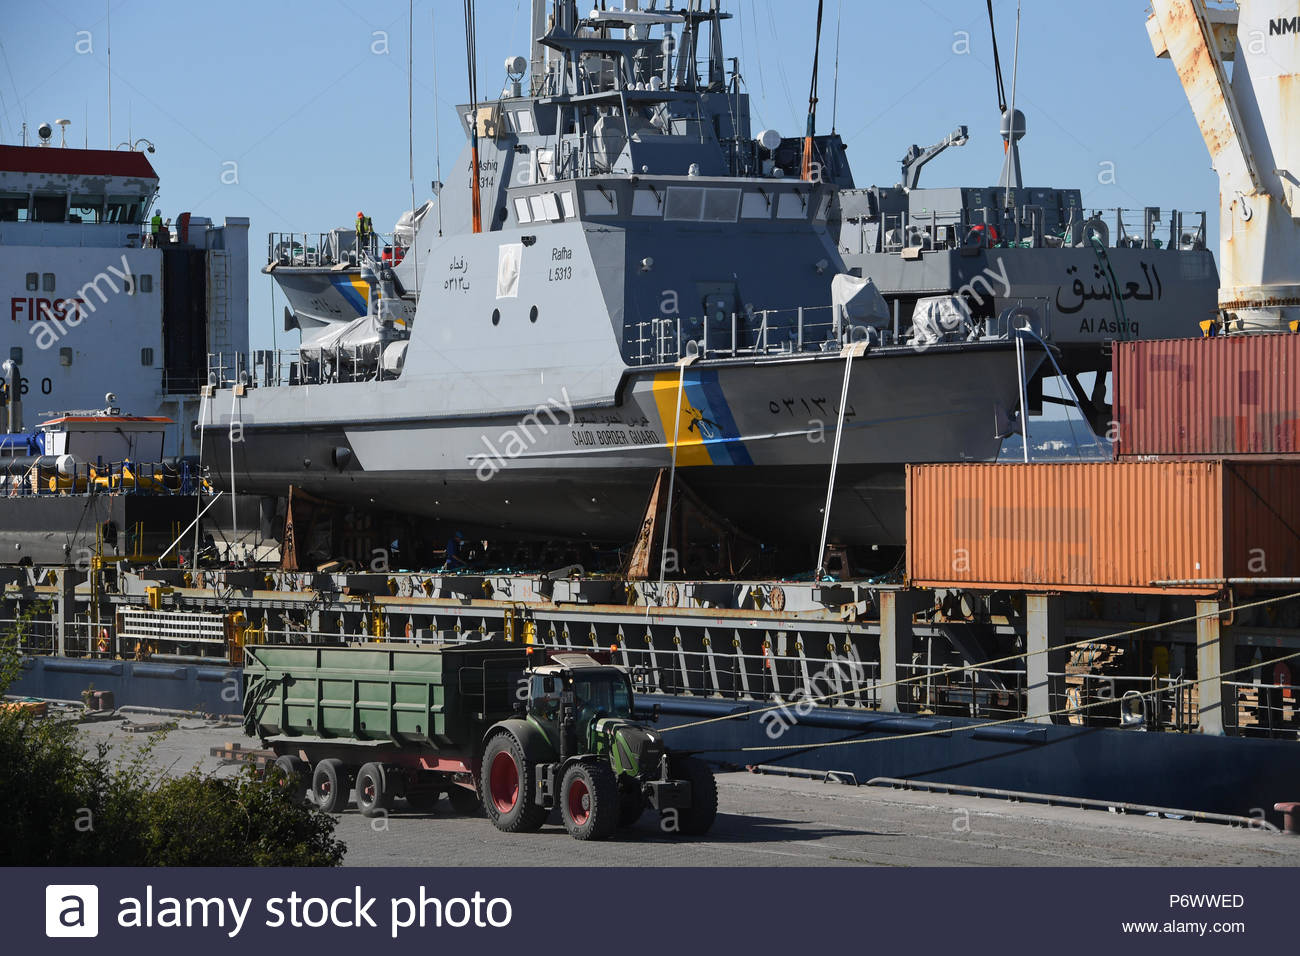 sassnitz-germany-03rd-july-2018-a-coast-guard-boat-for-saudi-arabia-being-loaded-on-a-transport-ship-in-the-port-of-mukran-the-luerssen-group-from-bremen-owner-of-the-wolgaster-shipyards-received-an-order-valued-in-the-billions-of-euros-for-the-construction-of-a-fleet-of-new-patrol-boats-for-saudi-arabia-and-began-with-construction-works-in-2015-only-in-march-this-year-however-did-the-federal-government-approved-the-delivery-to-the-kingdom-of-8-further-ships-around-300-workers-are-employed-by-the-wolgaster-luerssen-shipyards-credit-stefan-sauerdpa-zentralbilddpaalamy-live-news-P6WWED.jpg